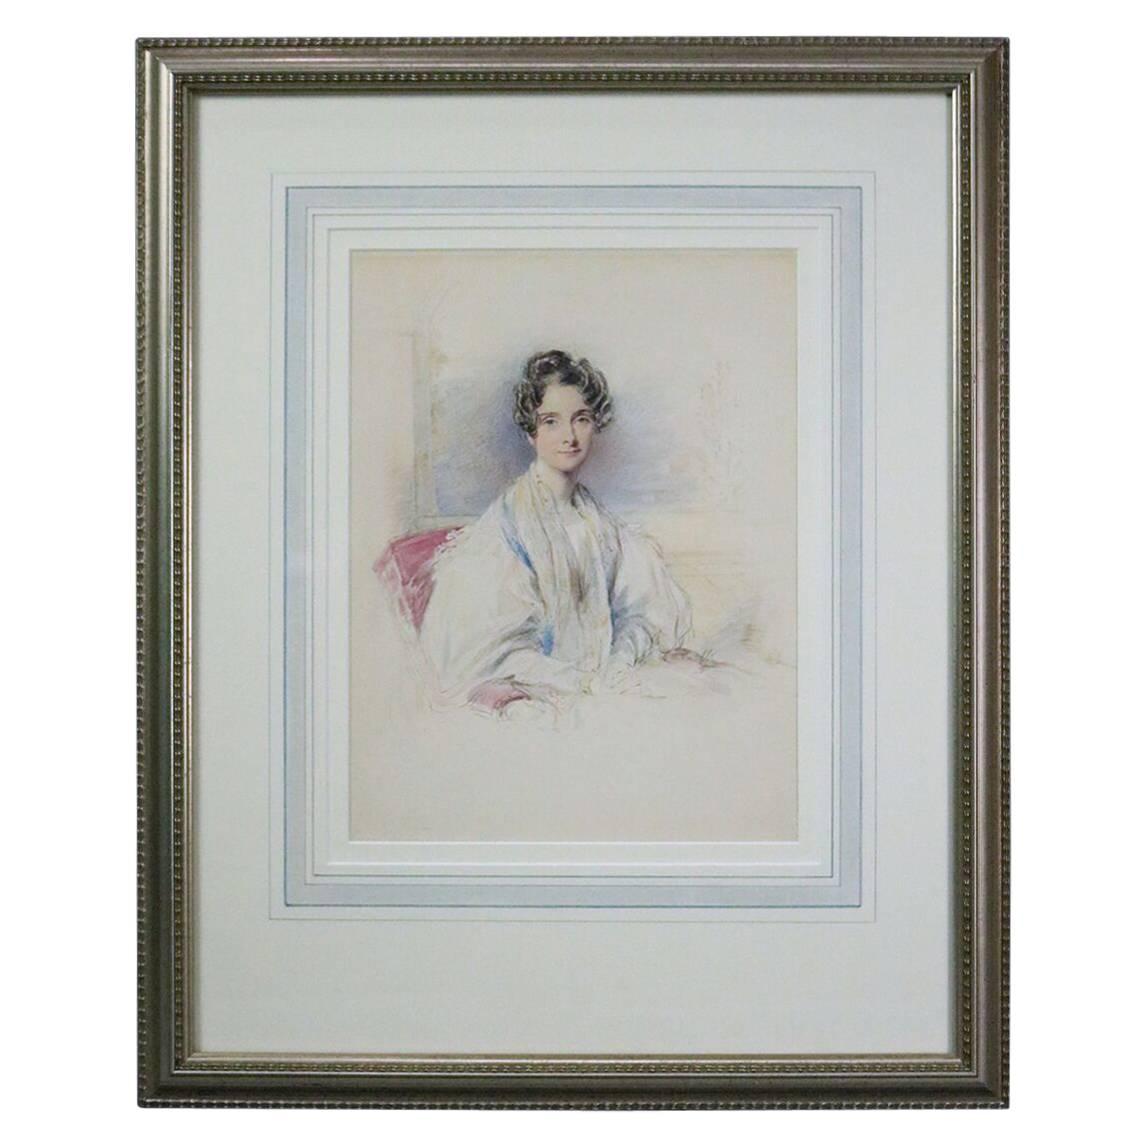 Antique English Watercolor of Mrs. Sandham by G. Richmond, Dated 1839